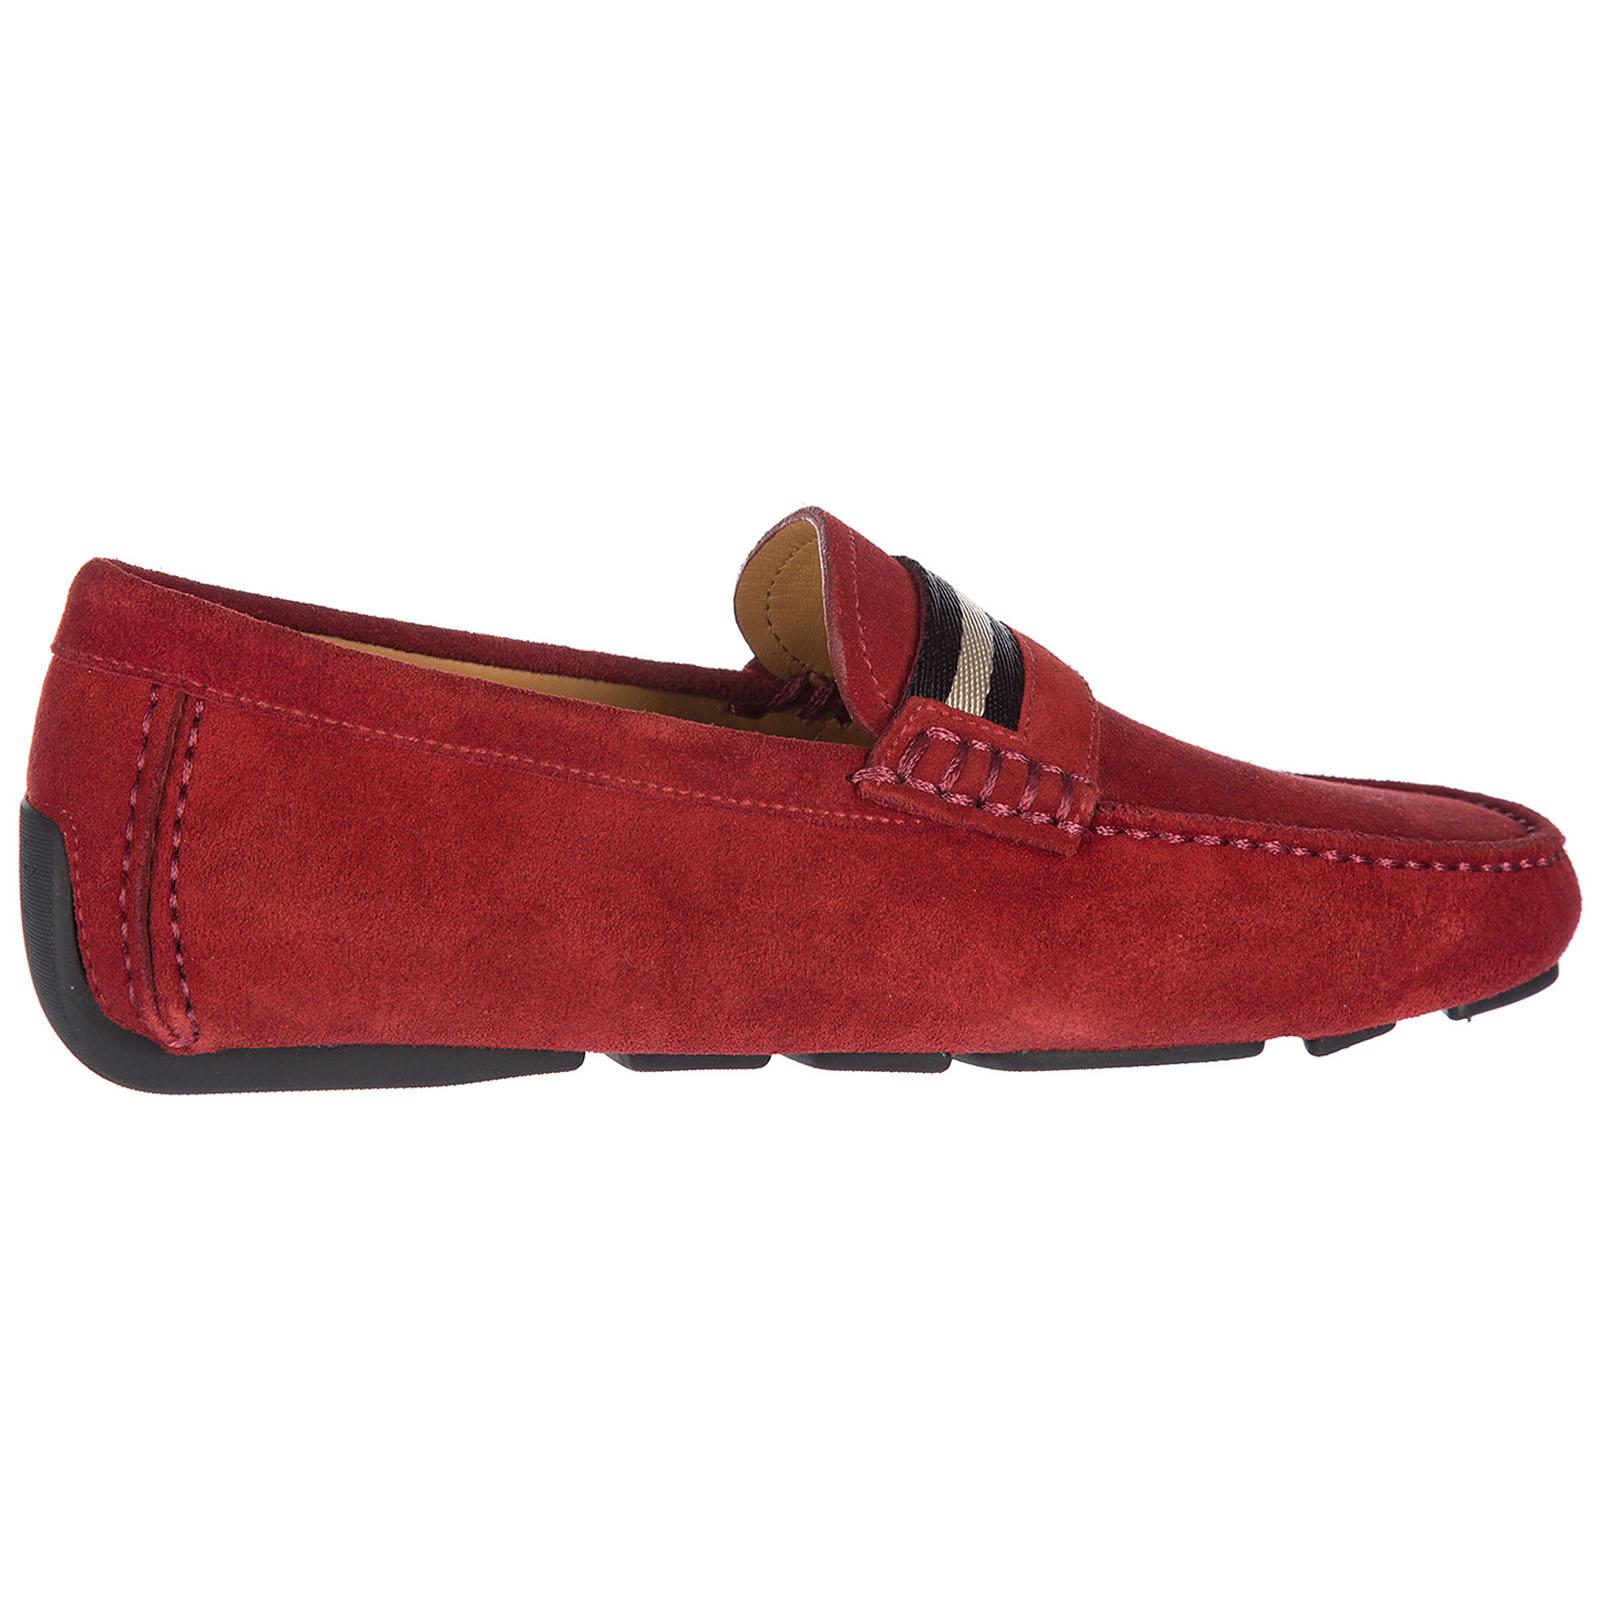 Bally Suede Loafers in Red for Men - Save 51% - Lyst